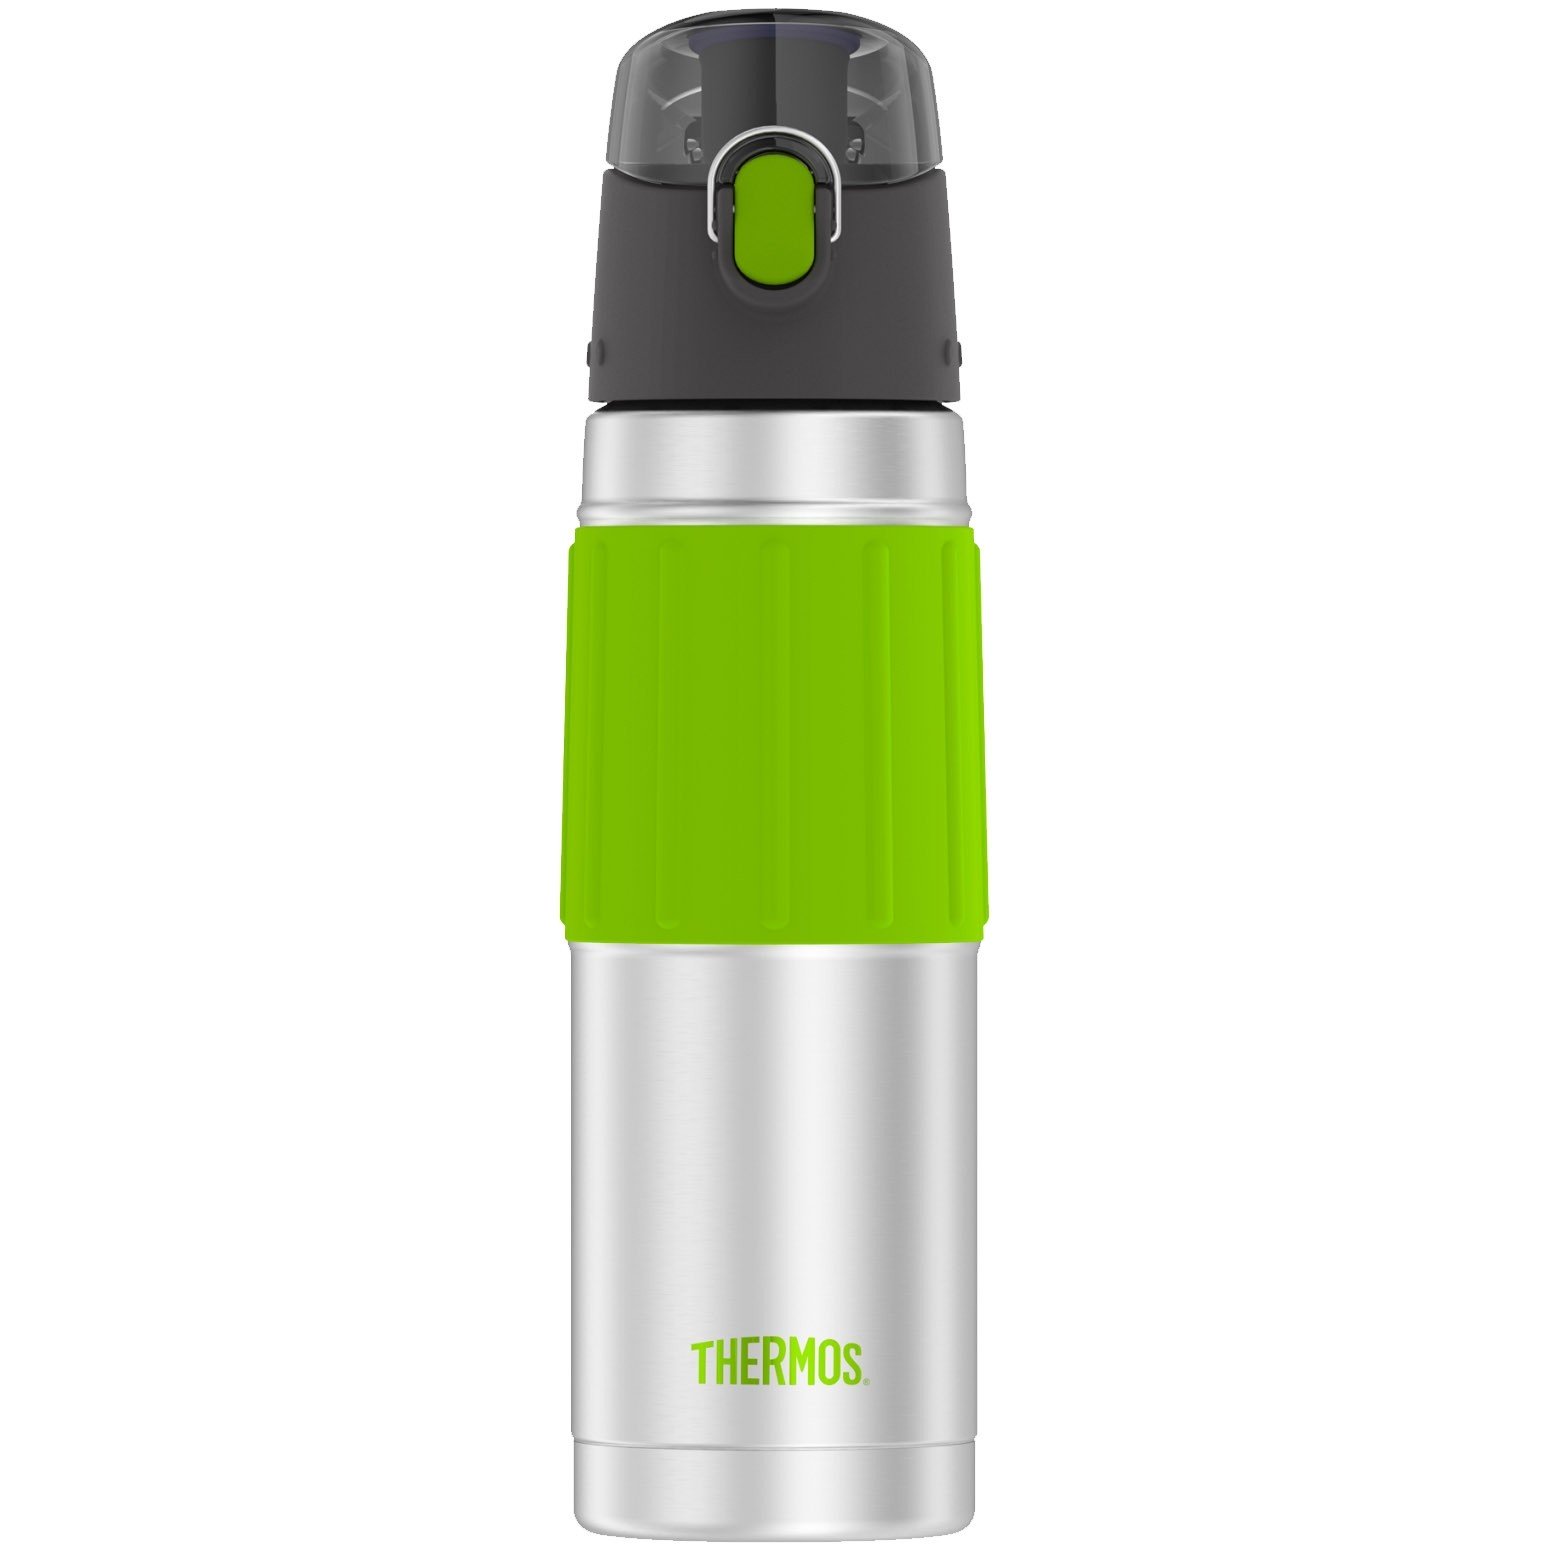 Vacuum Insulated Stainless Steel Hydration Bottle 18oz - Hydration